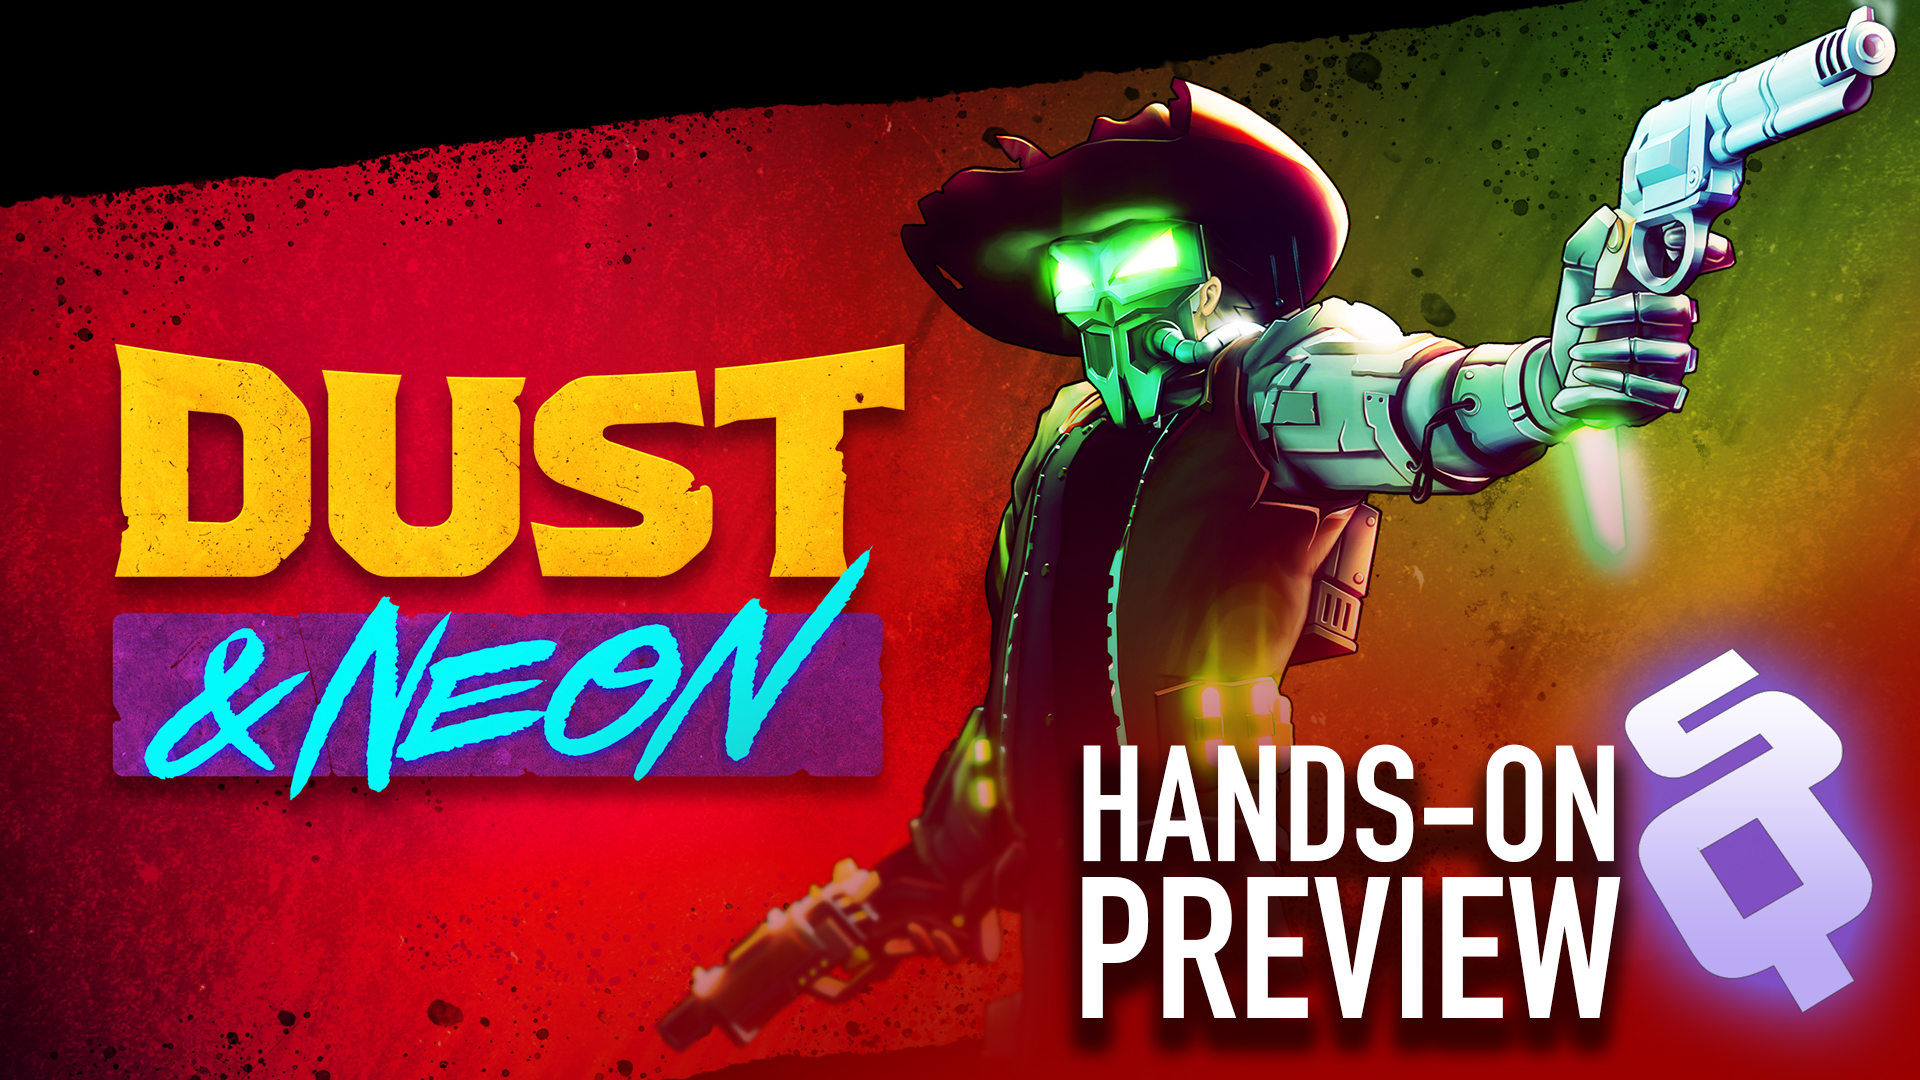 Hands-on Preview: Dust & Neon